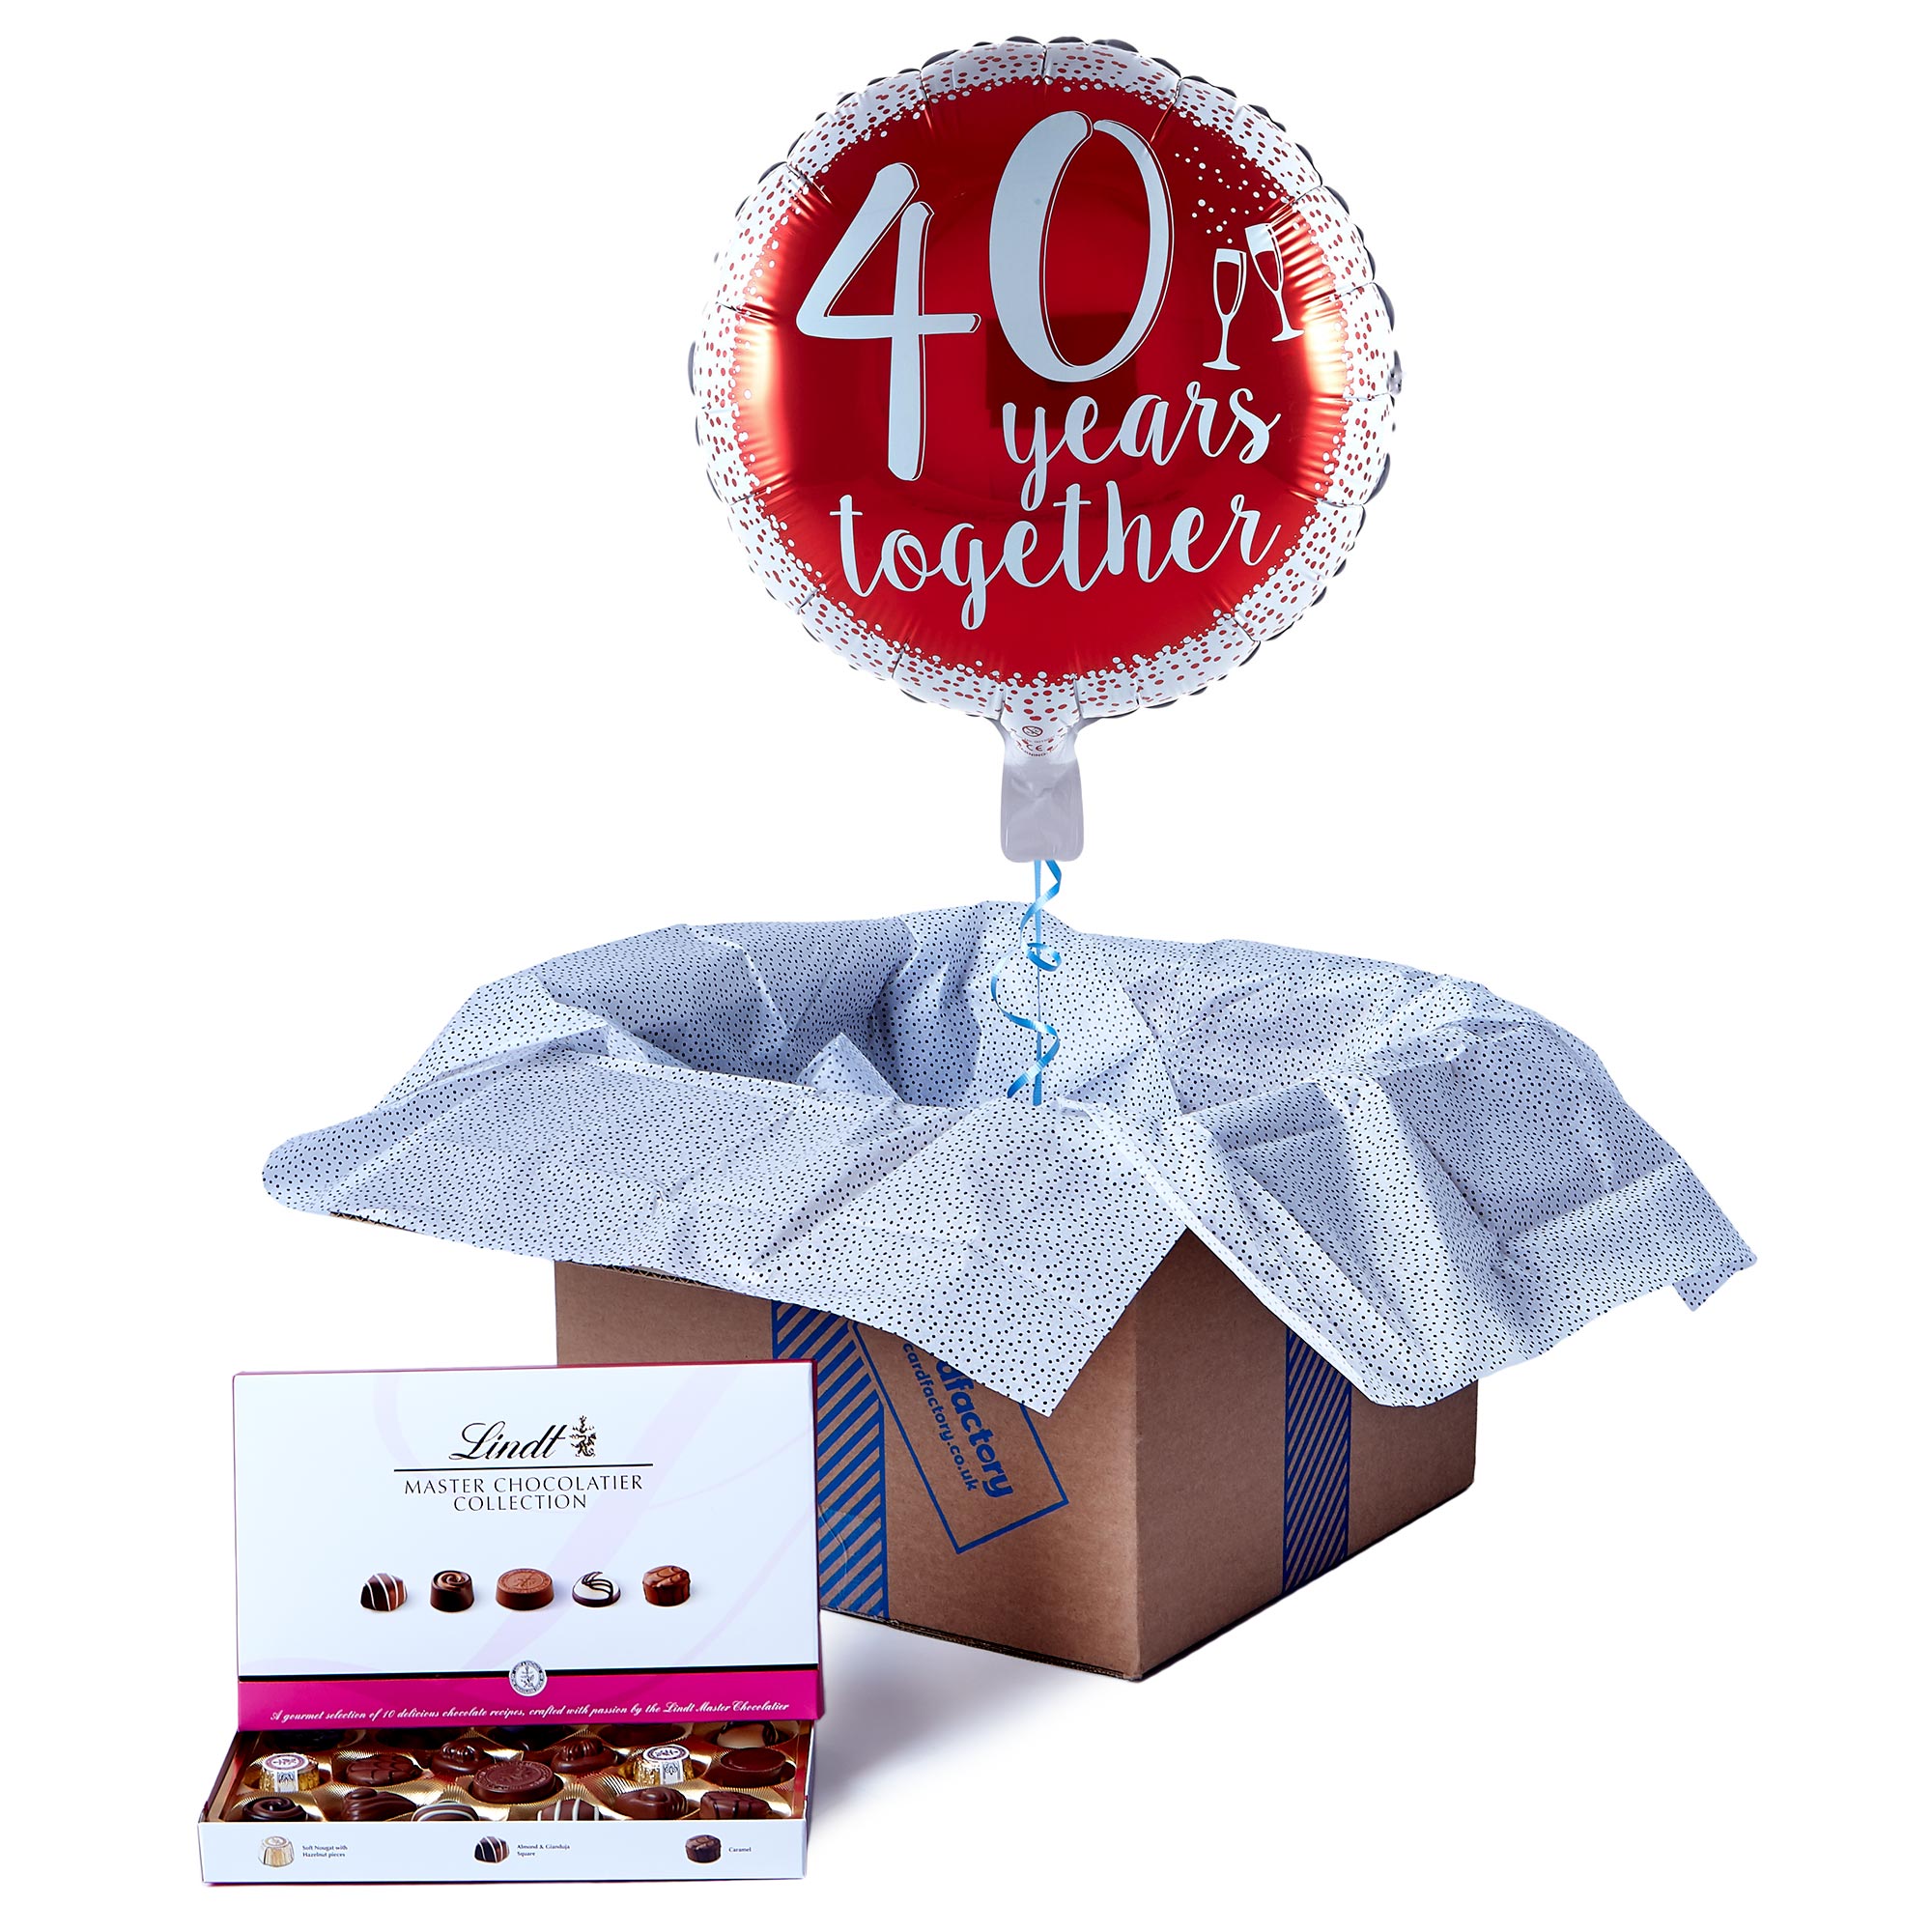 40 Years Together Balloon & Lindt Chocolates - FREE GIFT CARD!